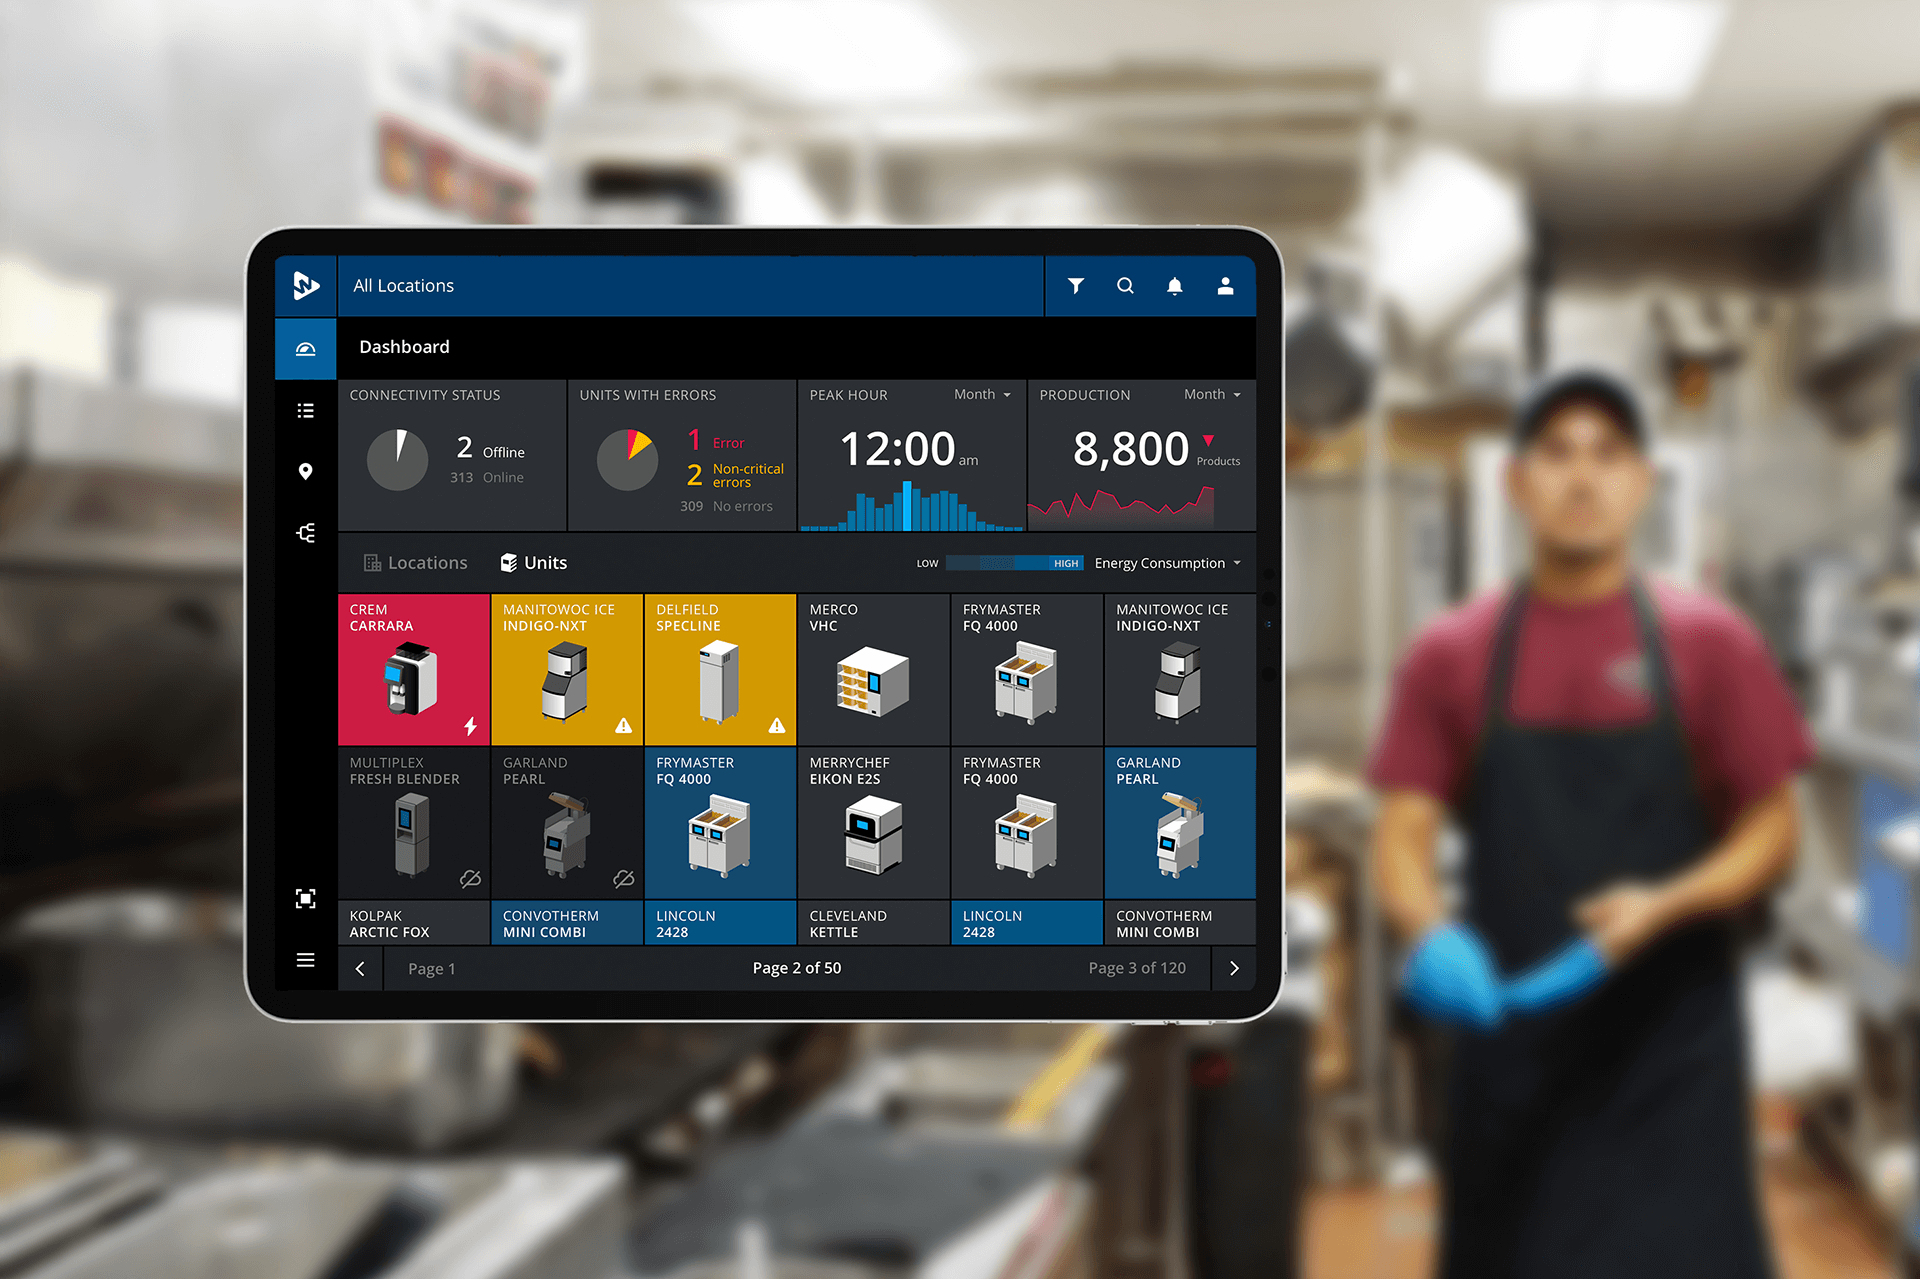 A tablet screen in the foreground shows the view of several kitchen appliances. In the background a potential user in his catering kitchen.